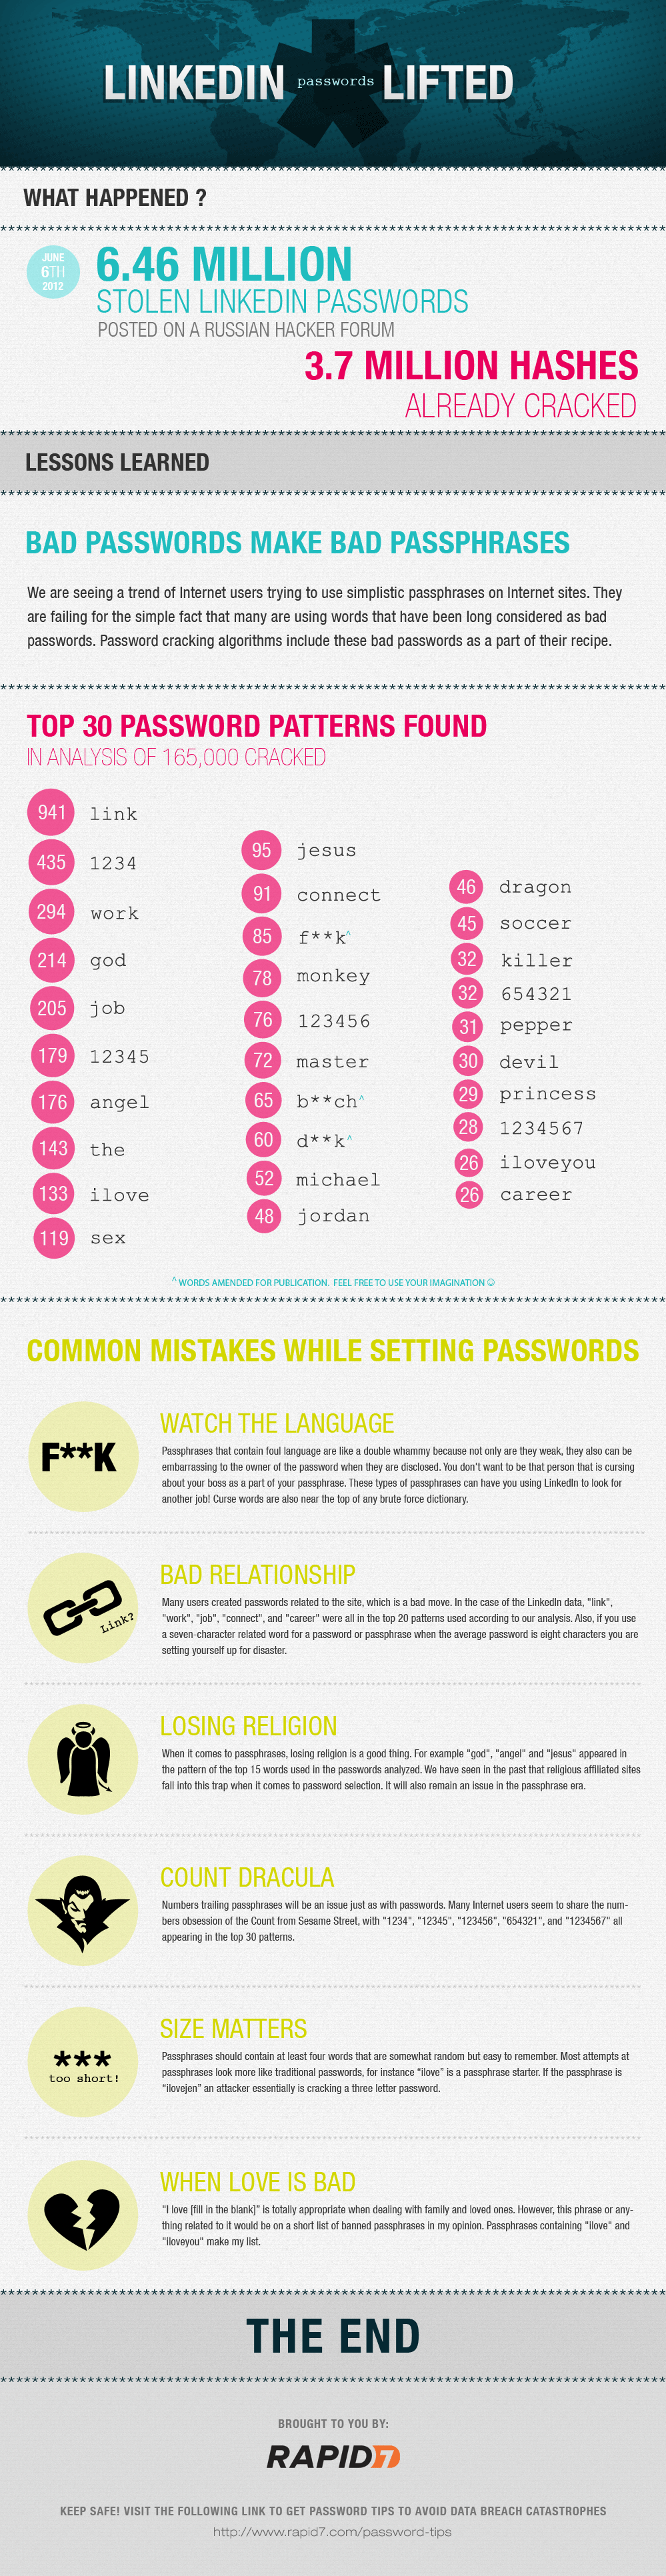 linkedin-password-breach-infographic.png